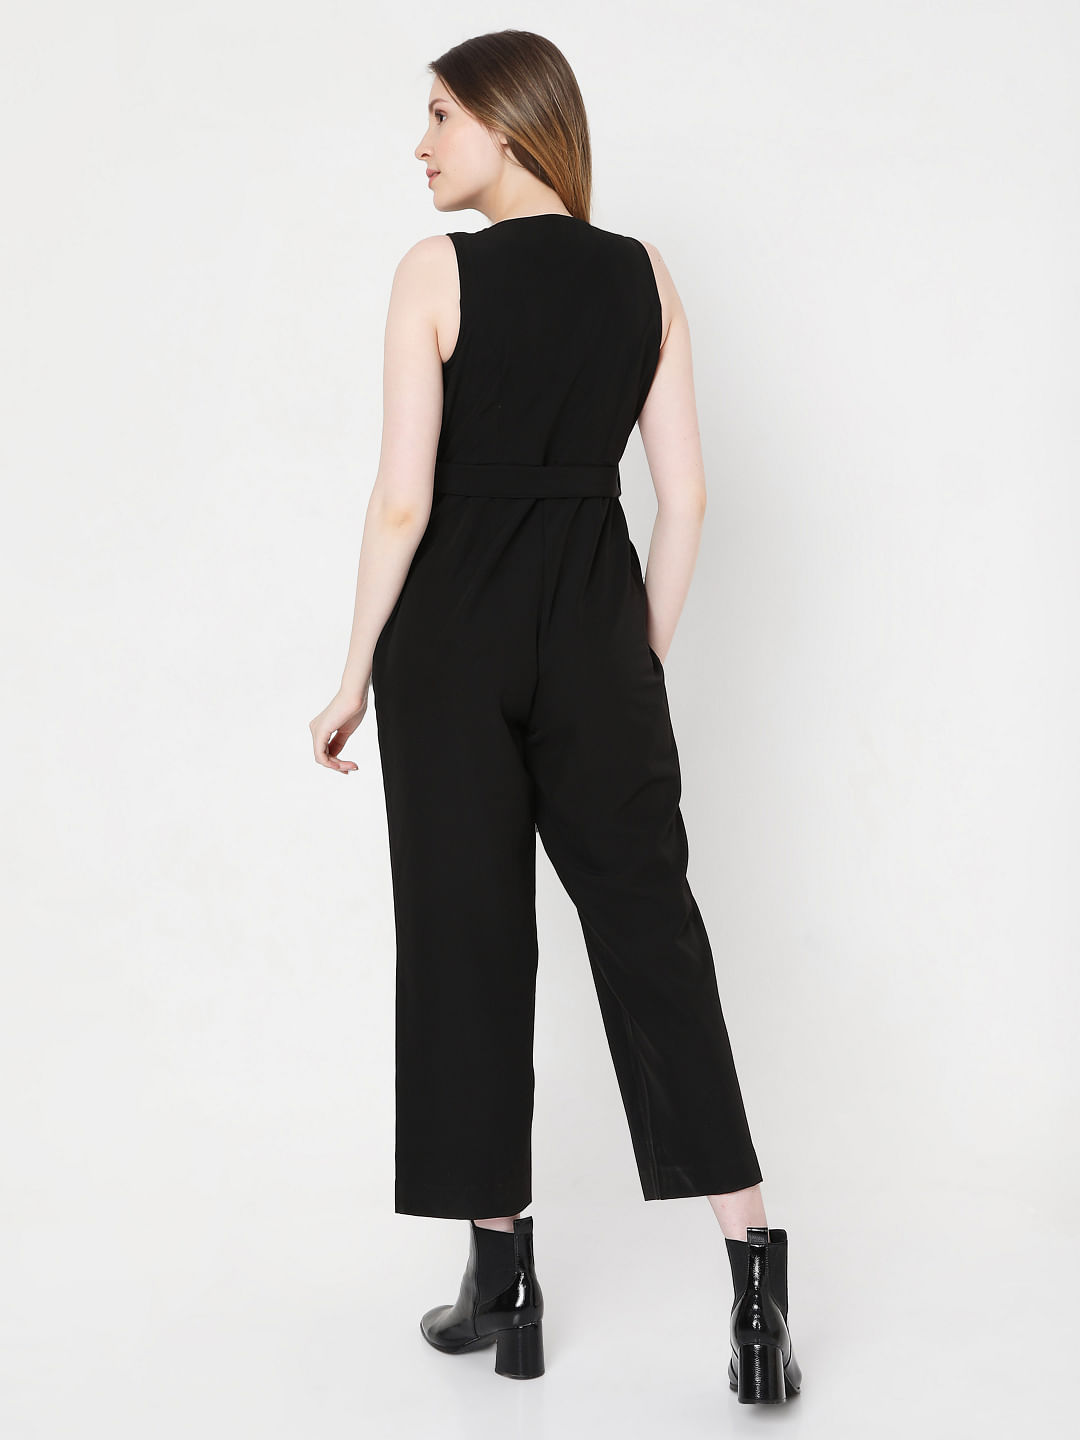 Strapless Belted Jumpsuit in Black  Get great deals at JustFab